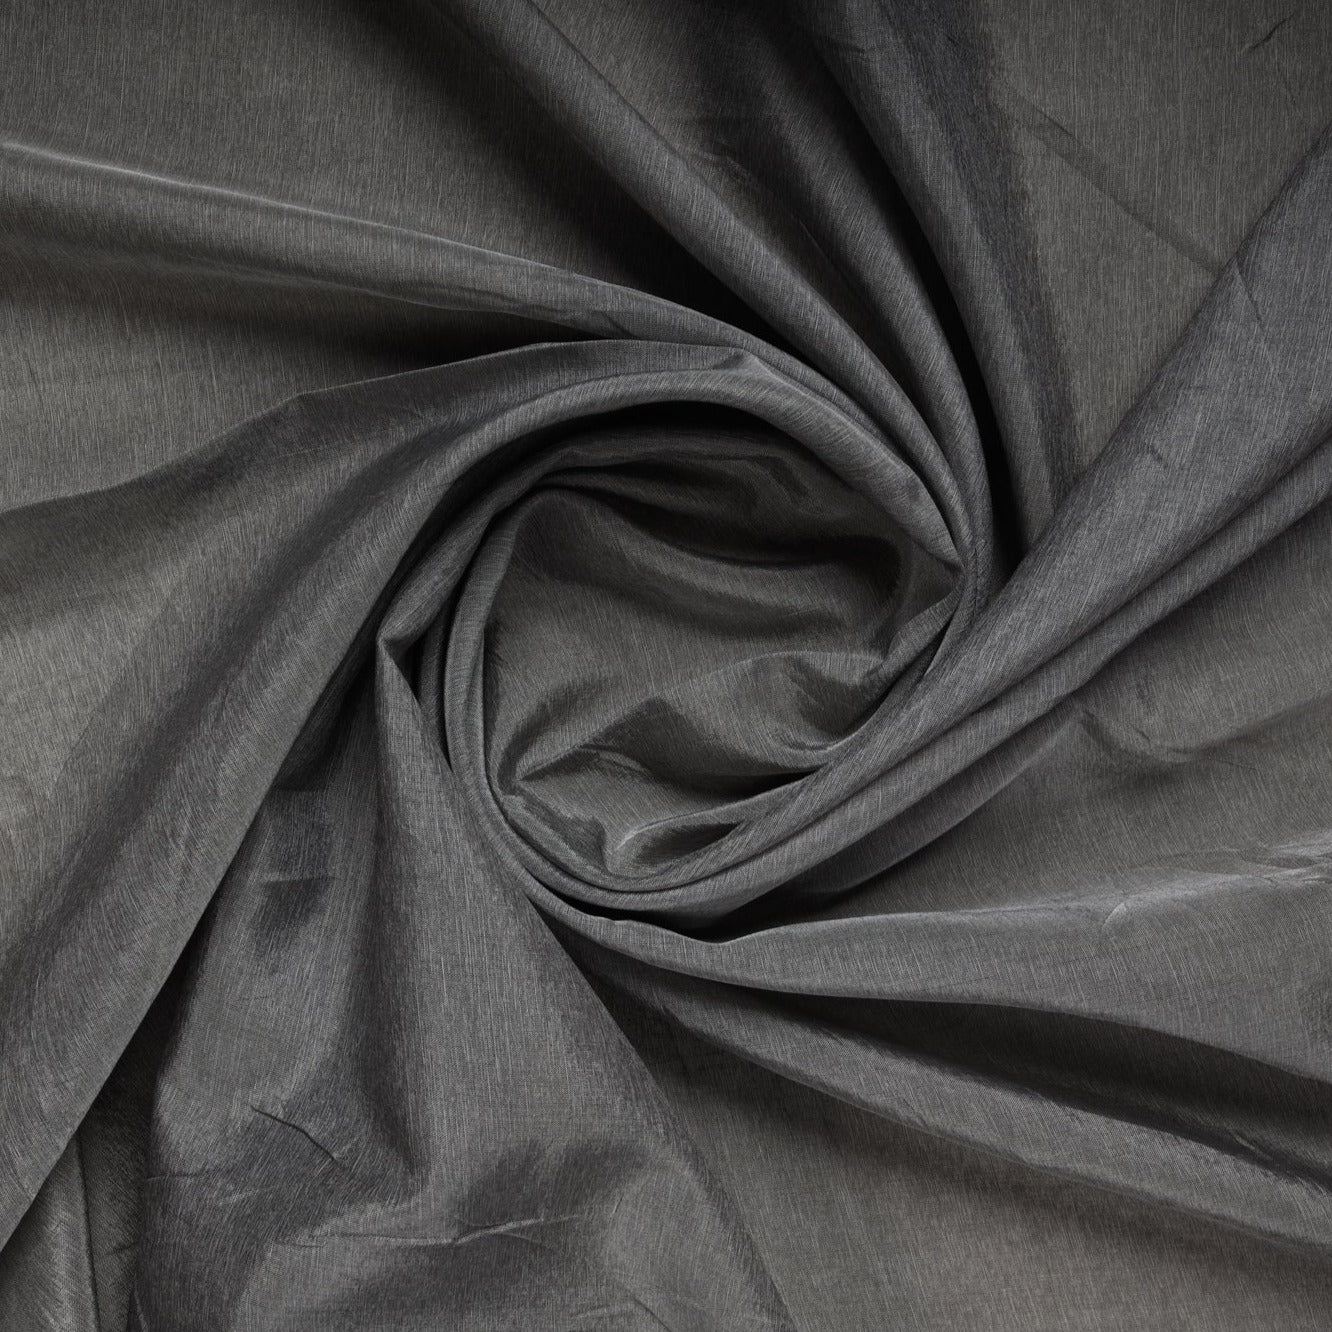 Grey Solid Polyester Cotton Shirting Fabric Trade Uno